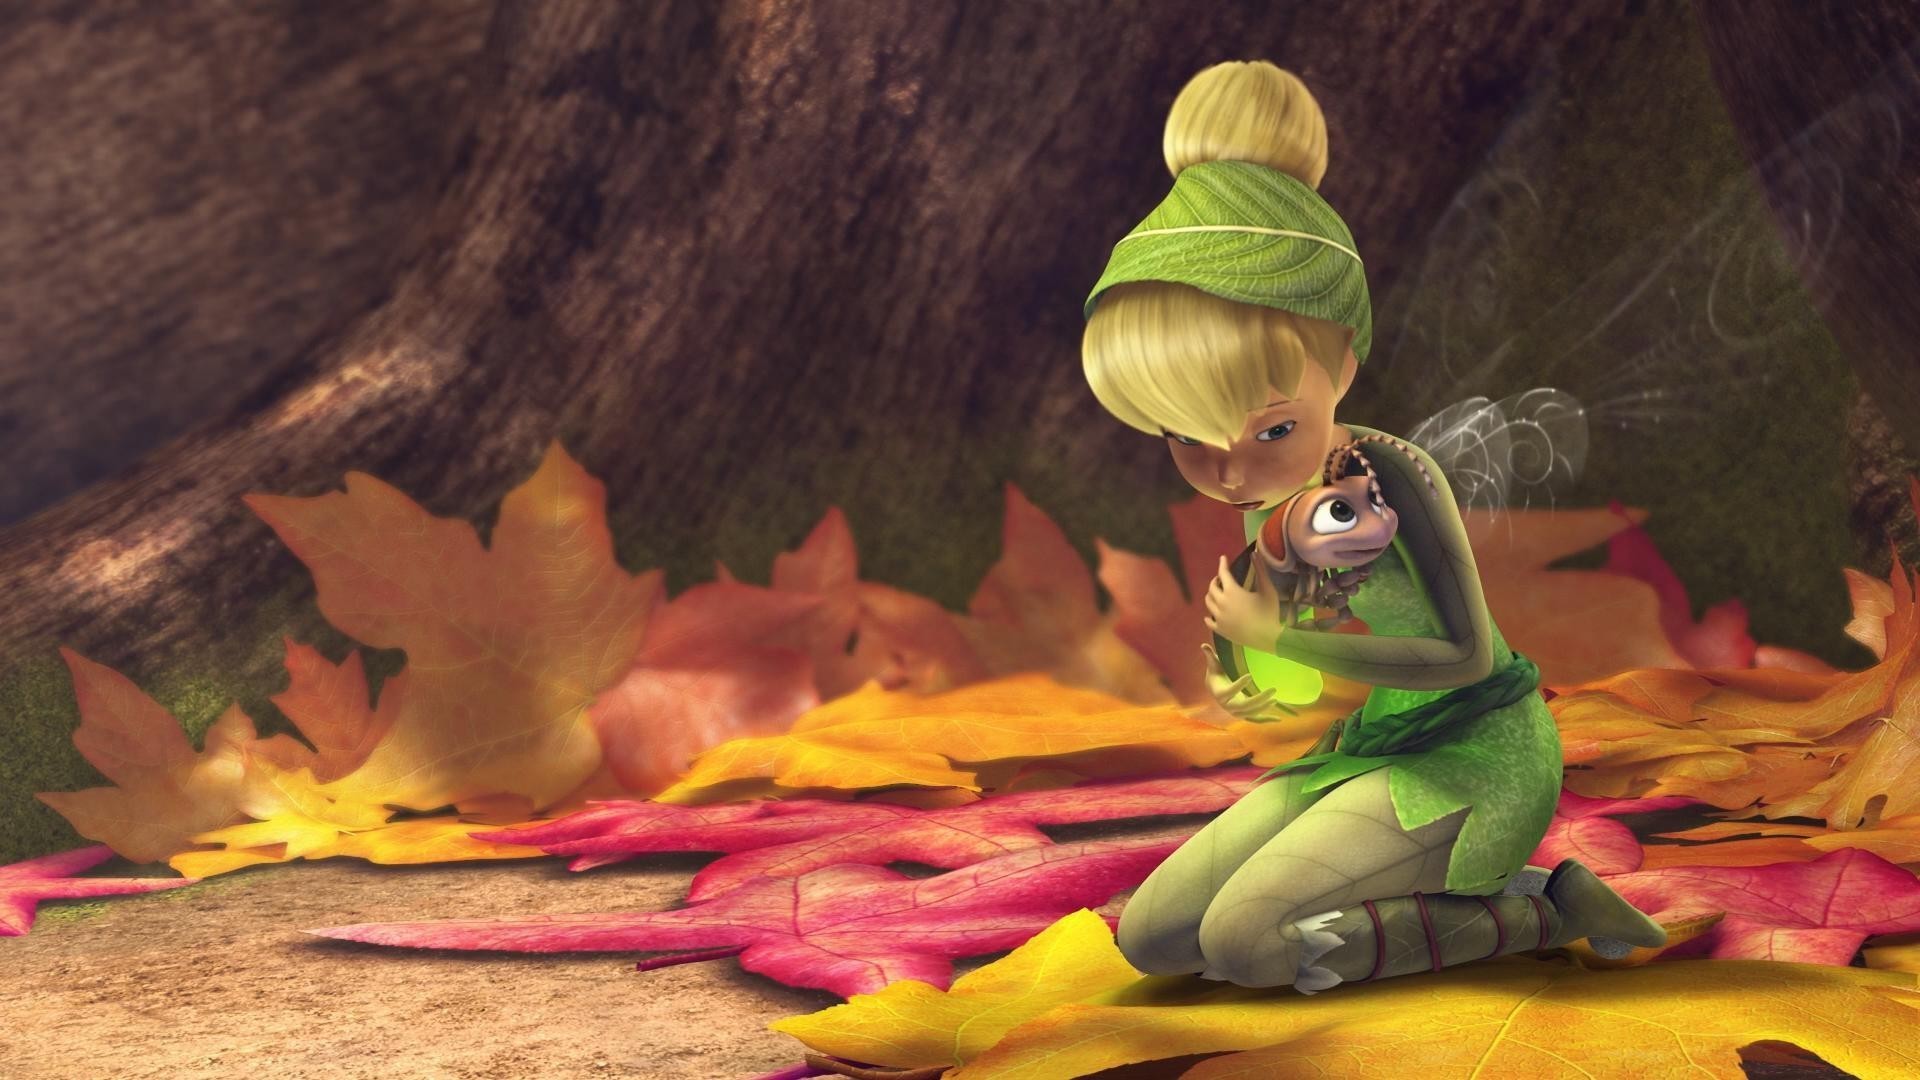 1920x1080 Movie - Tinker Bell and the Lost Treasure Wallpaper